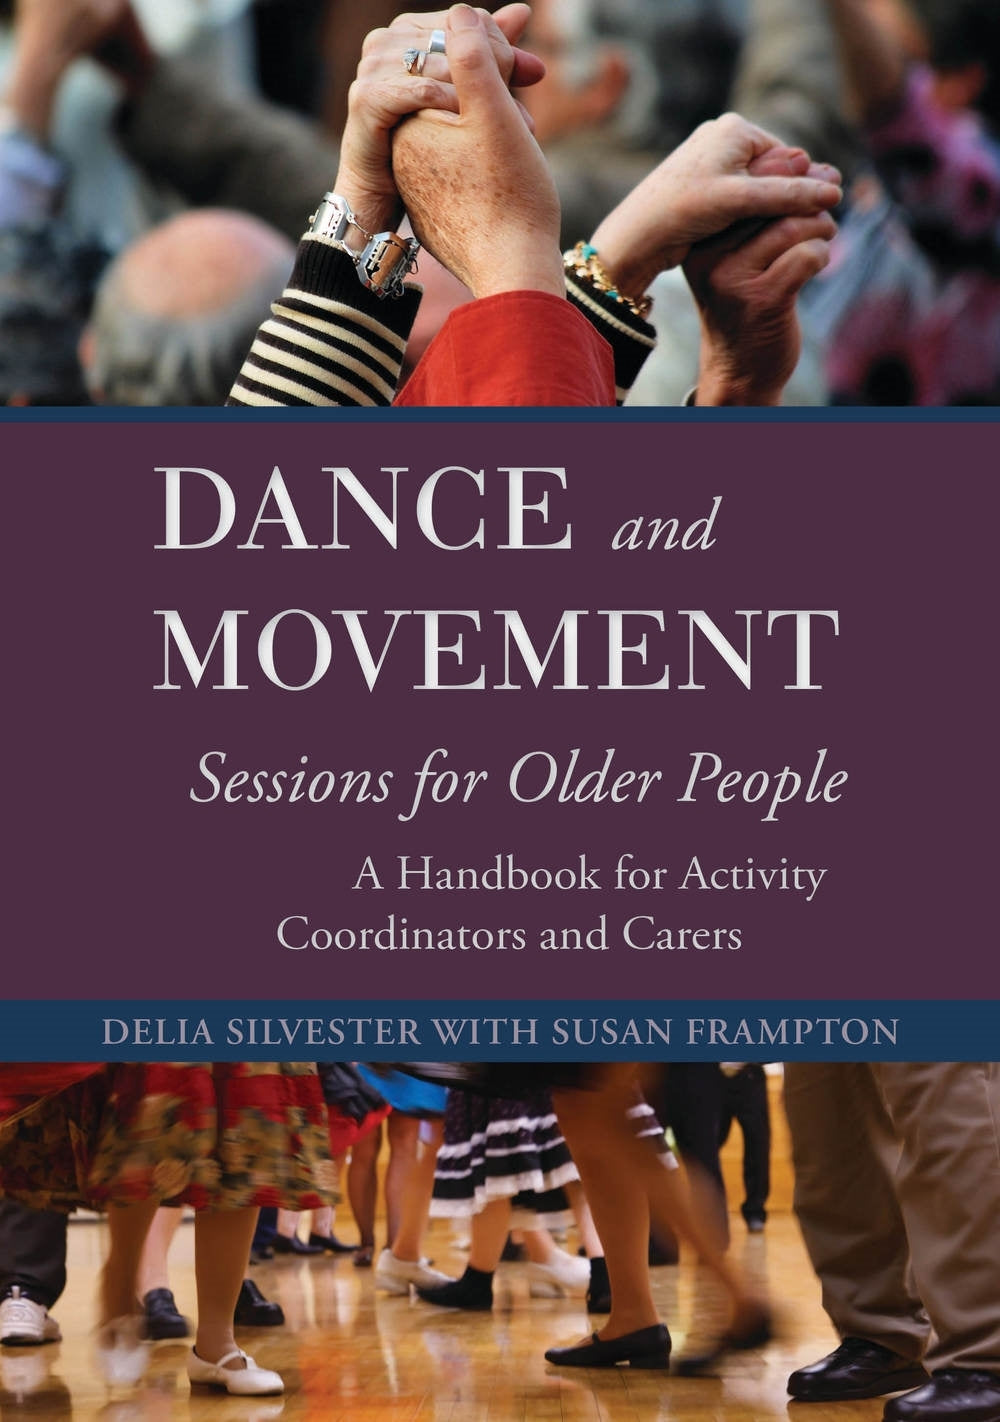 Dance and Movement Sessions for Older People by Delia Silvester